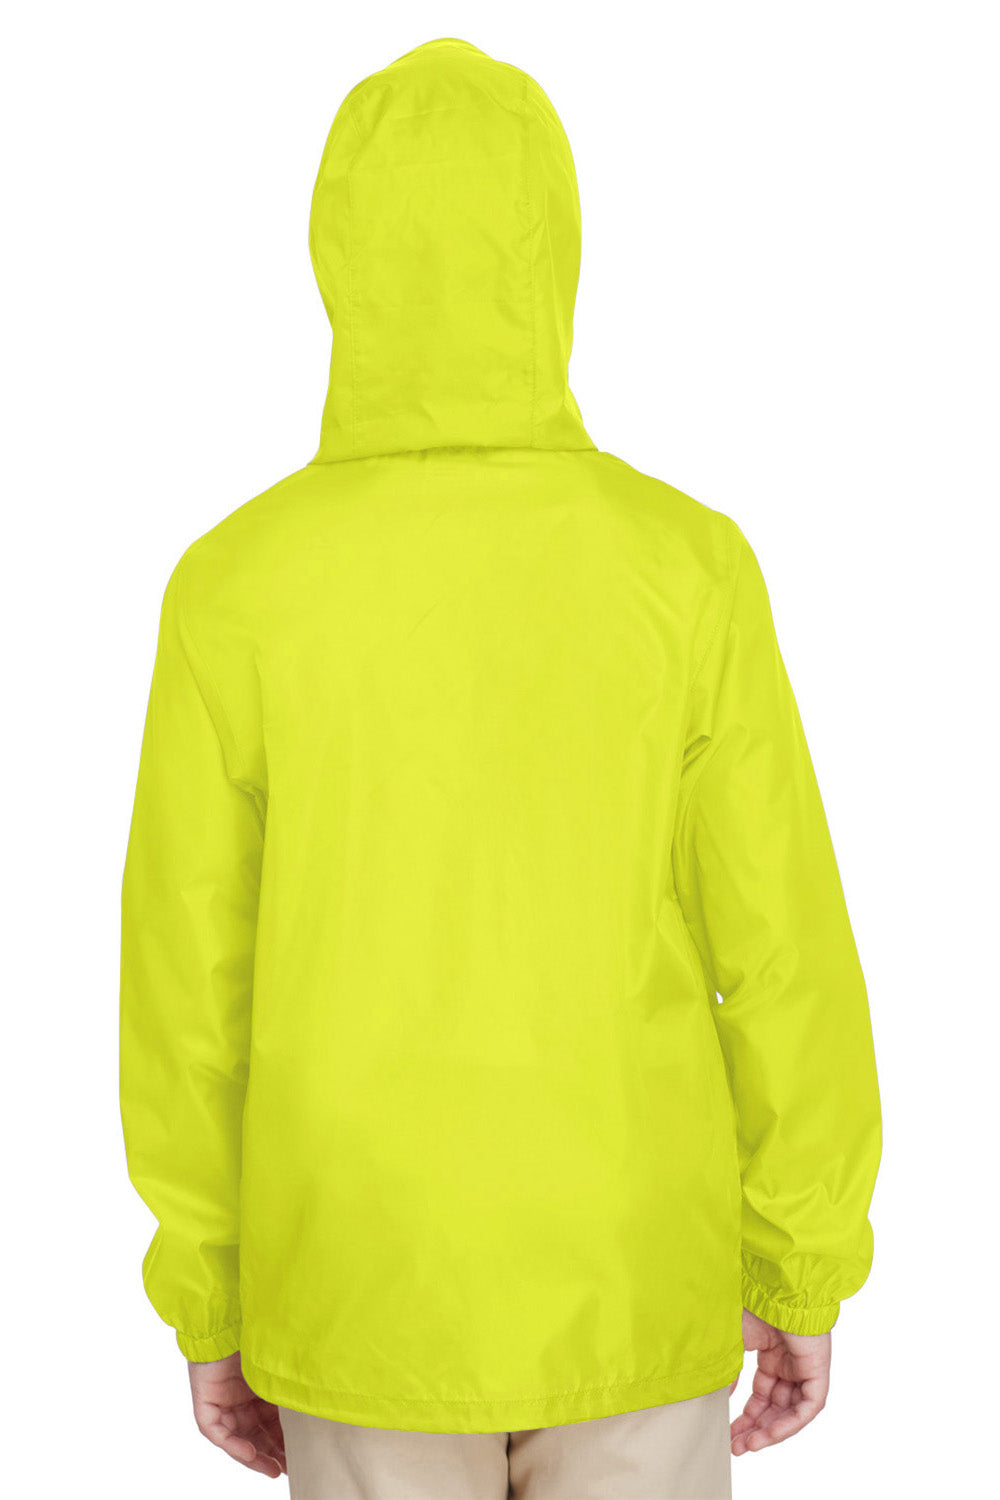 Team 365 TT73Y Youth Zone Protect Water Resistant Full Zip Hooded Jacket Safety Yellow Back